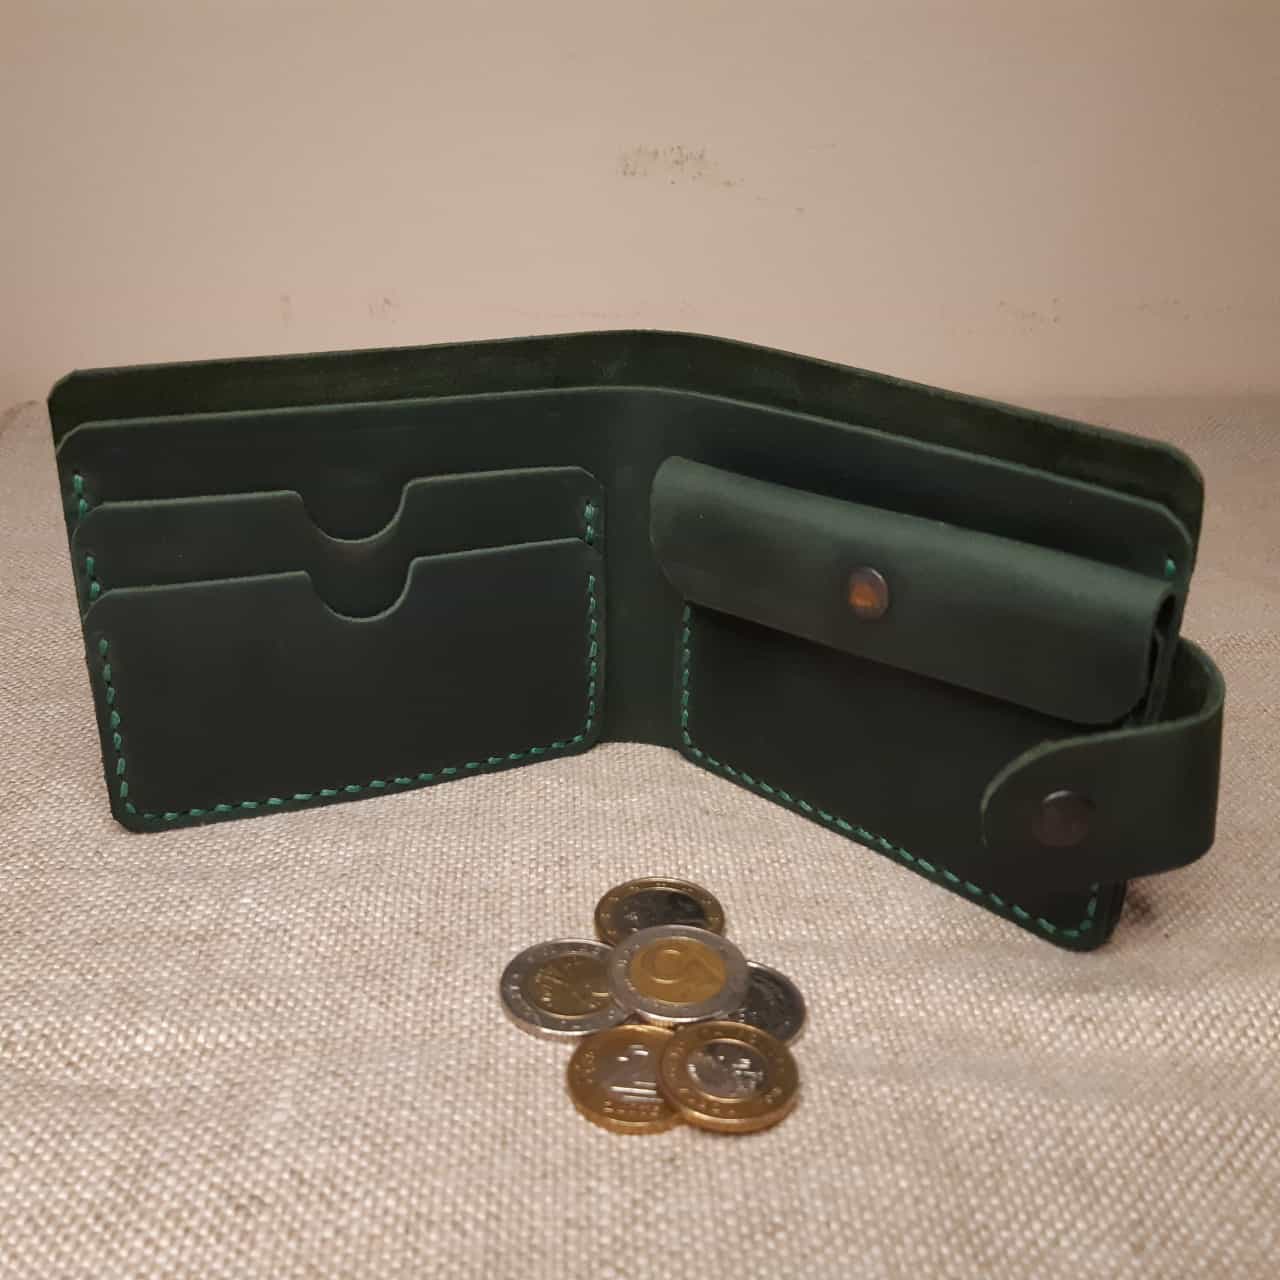 Dark Green Leather Wallet With A Clasp And Coin Pocket Buy Now 5611